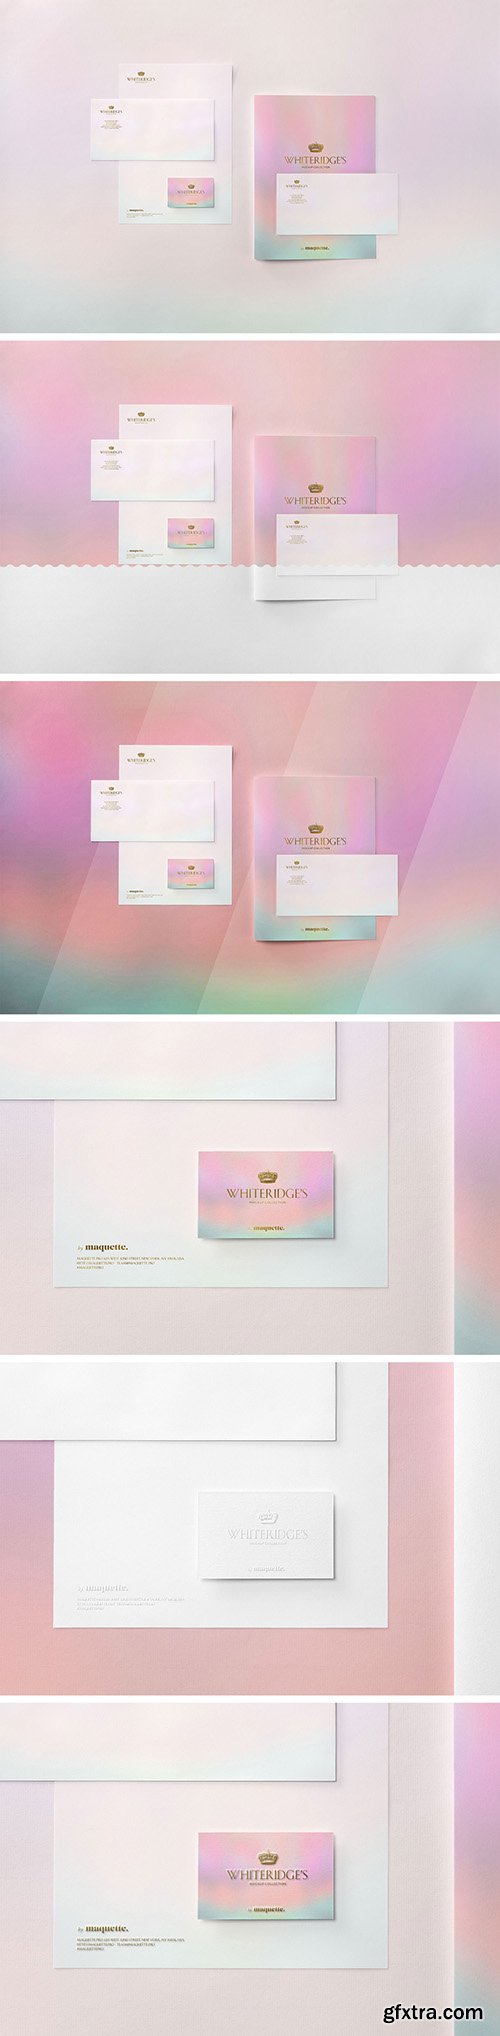 Luxury Gold-Embossed Corporate Stationery Mockup 7 130430184